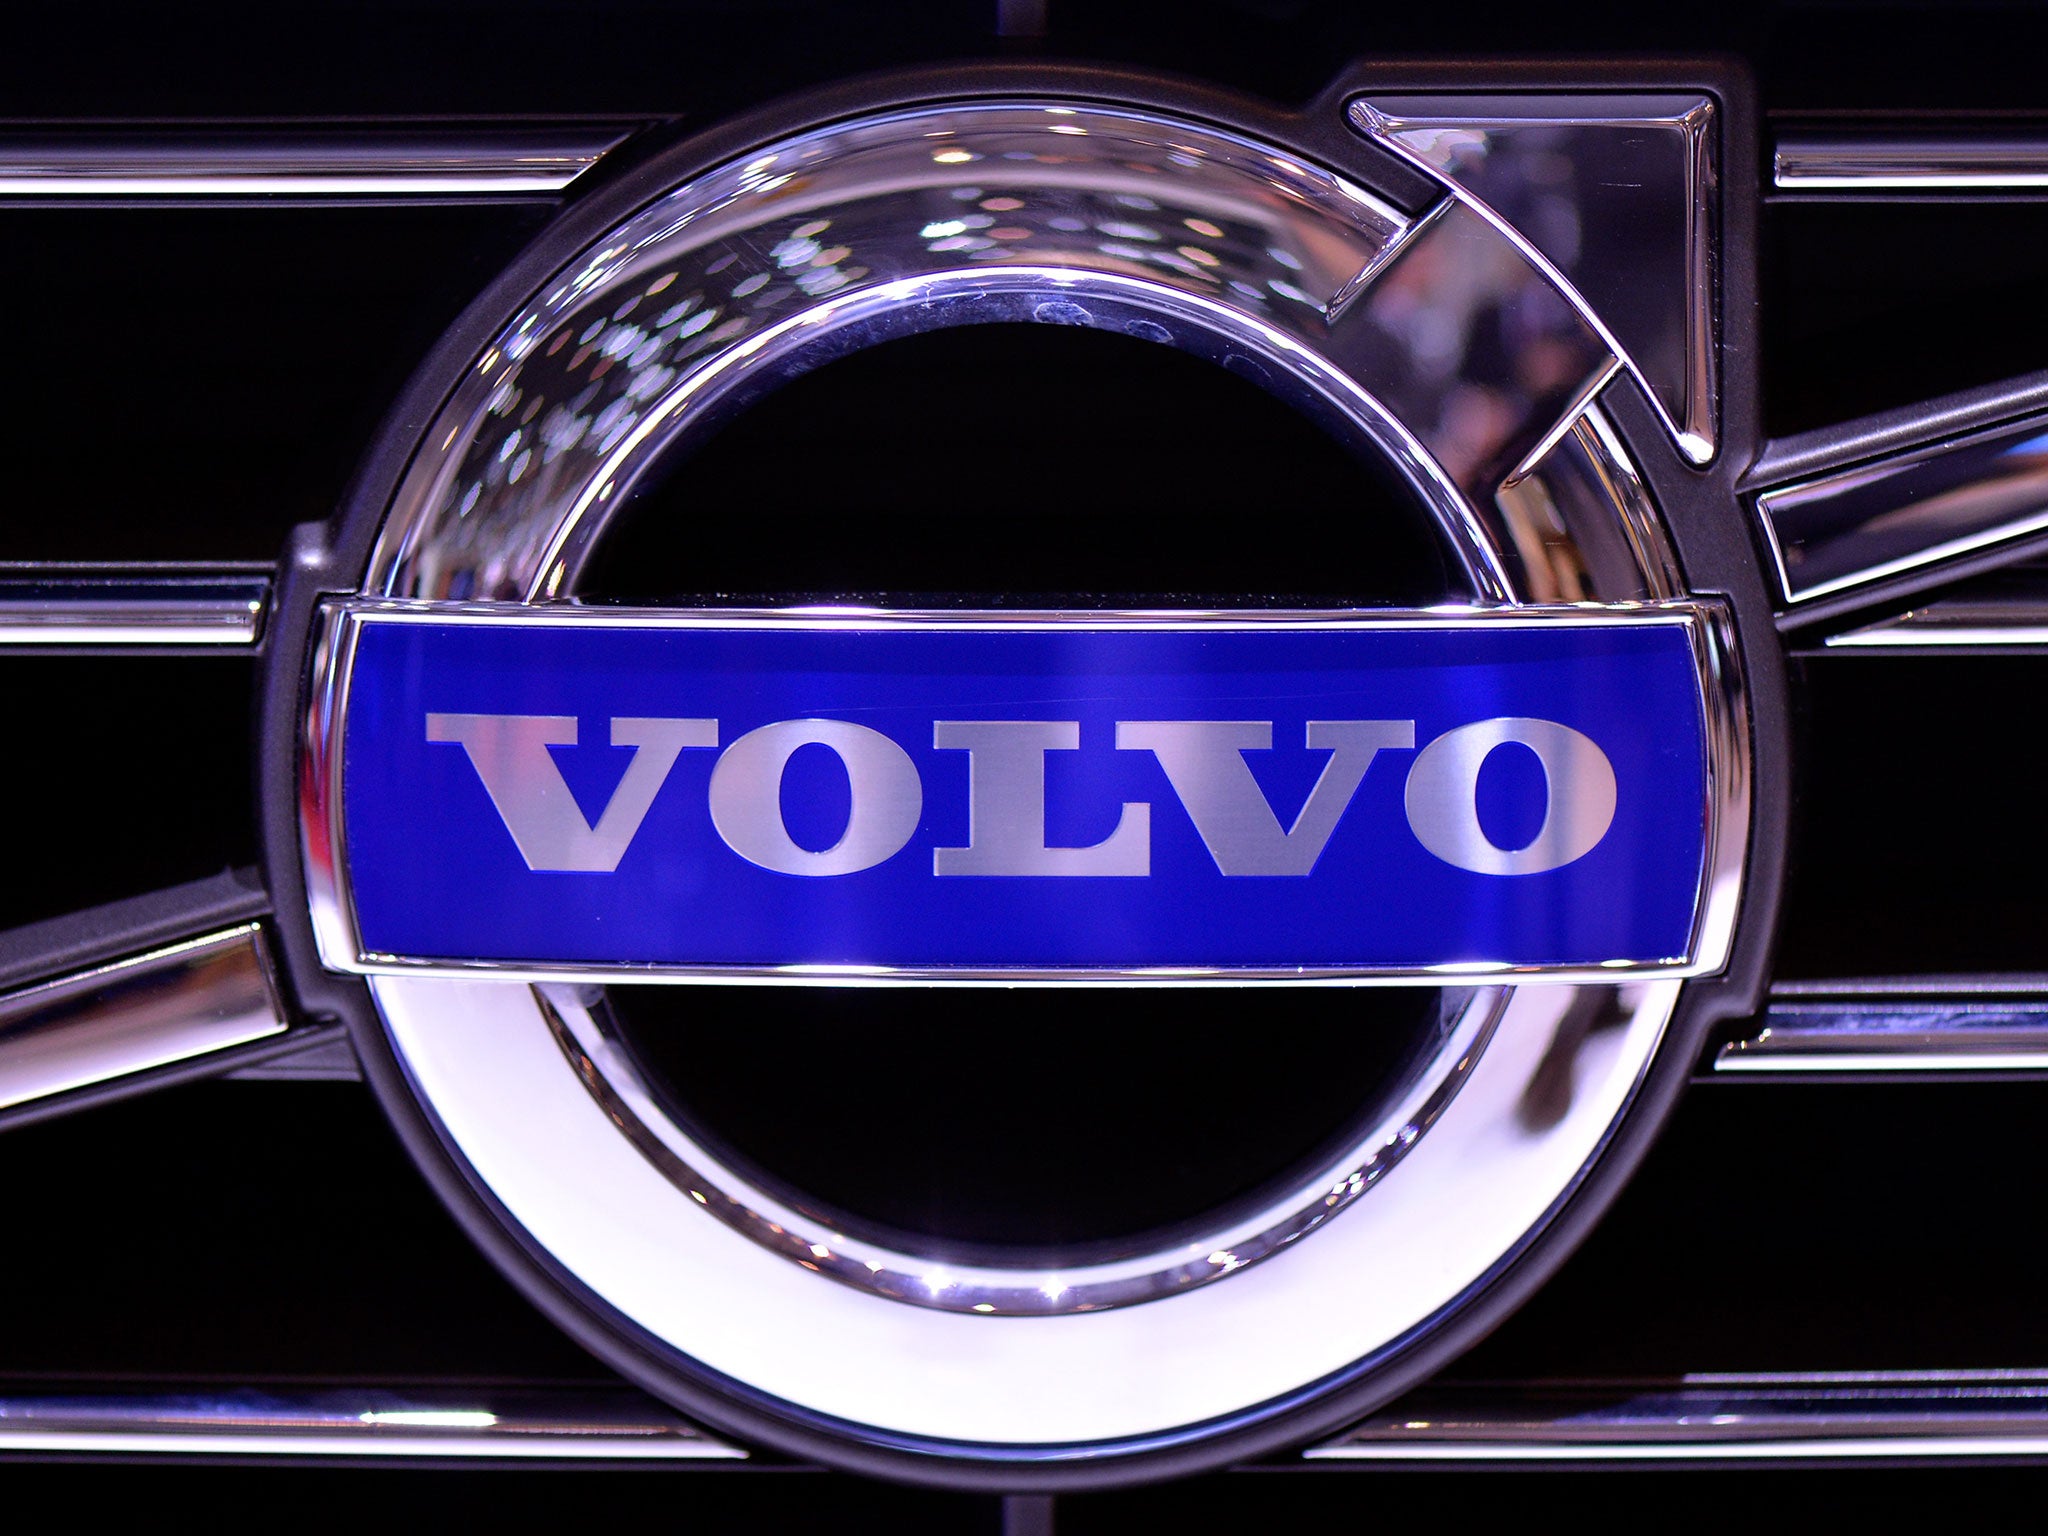 The Volvo logo is seen during the 83rd Geneva Motor Show on March 6, 2013 in Geneva, Switzerland.